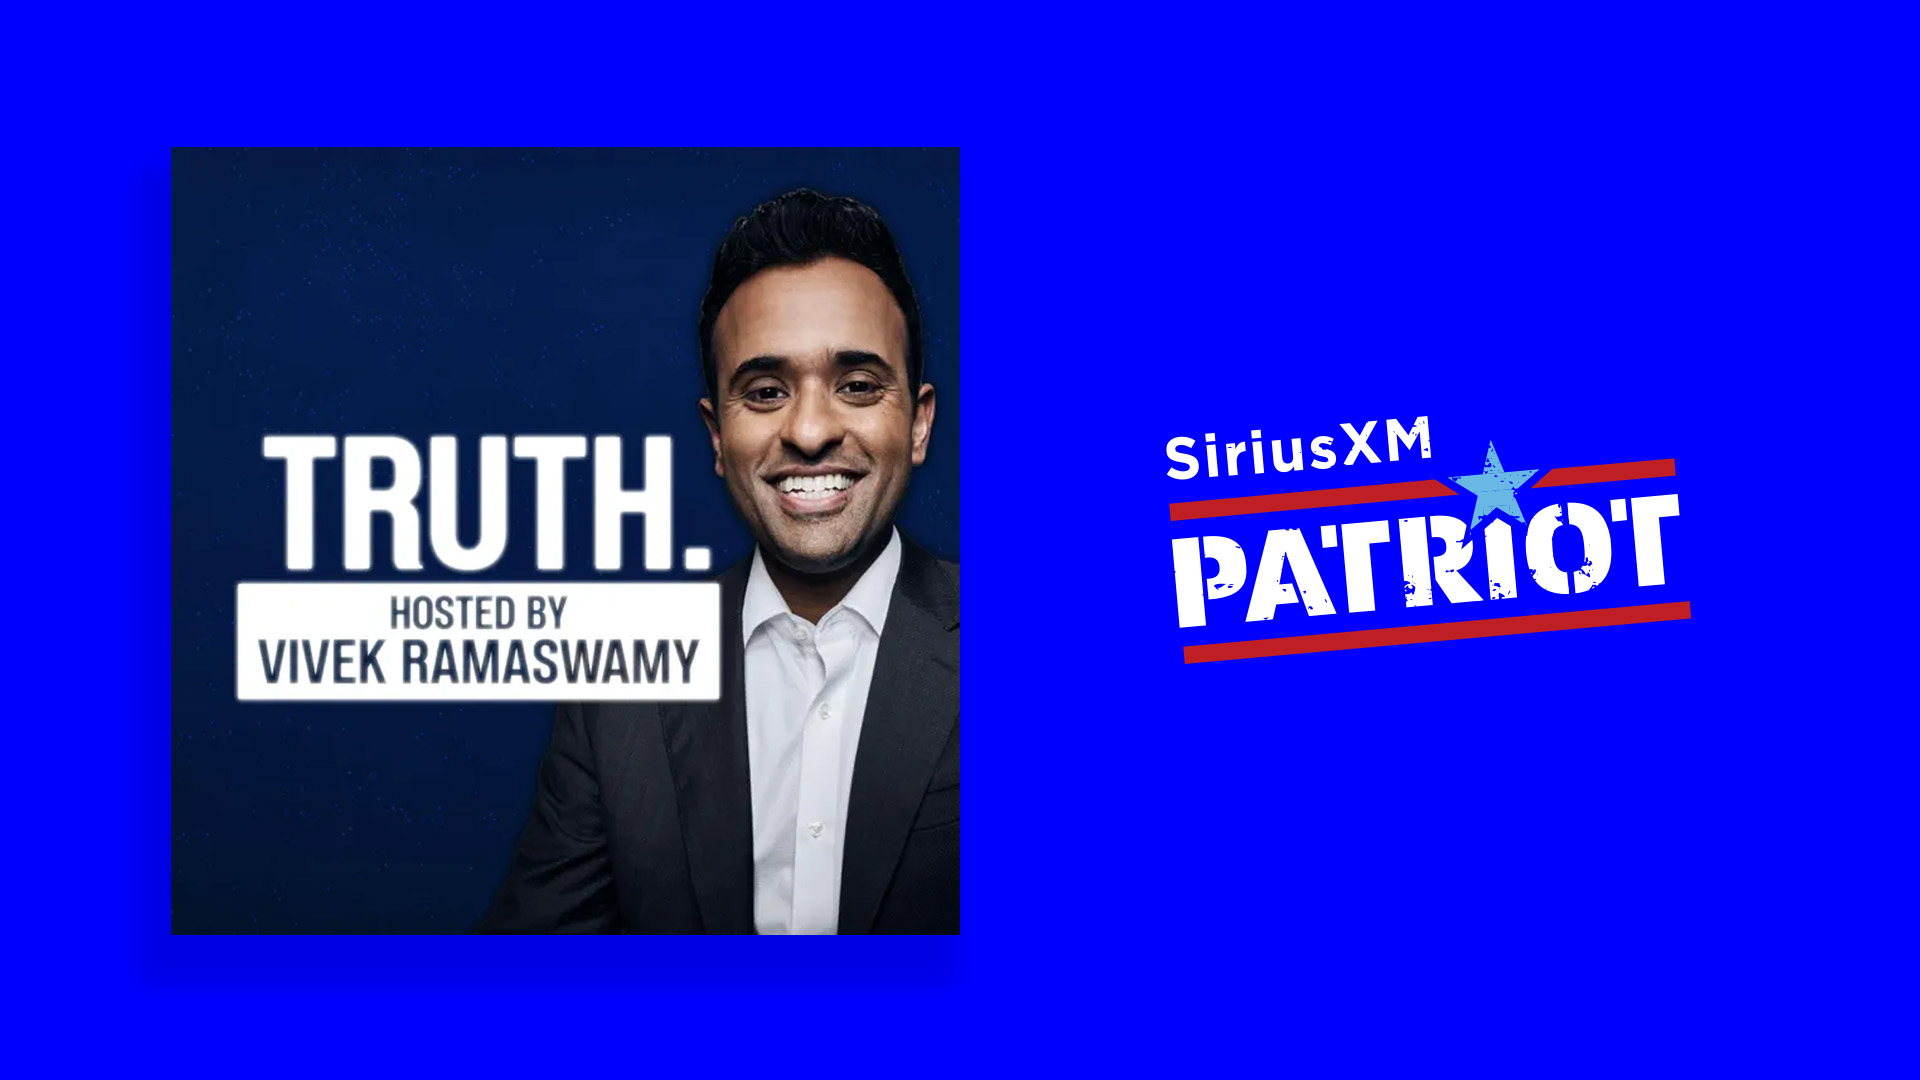 'TRUTH with Vivek Ramaswamy' Joins the SiriusXM Patriot Weekend Lineup